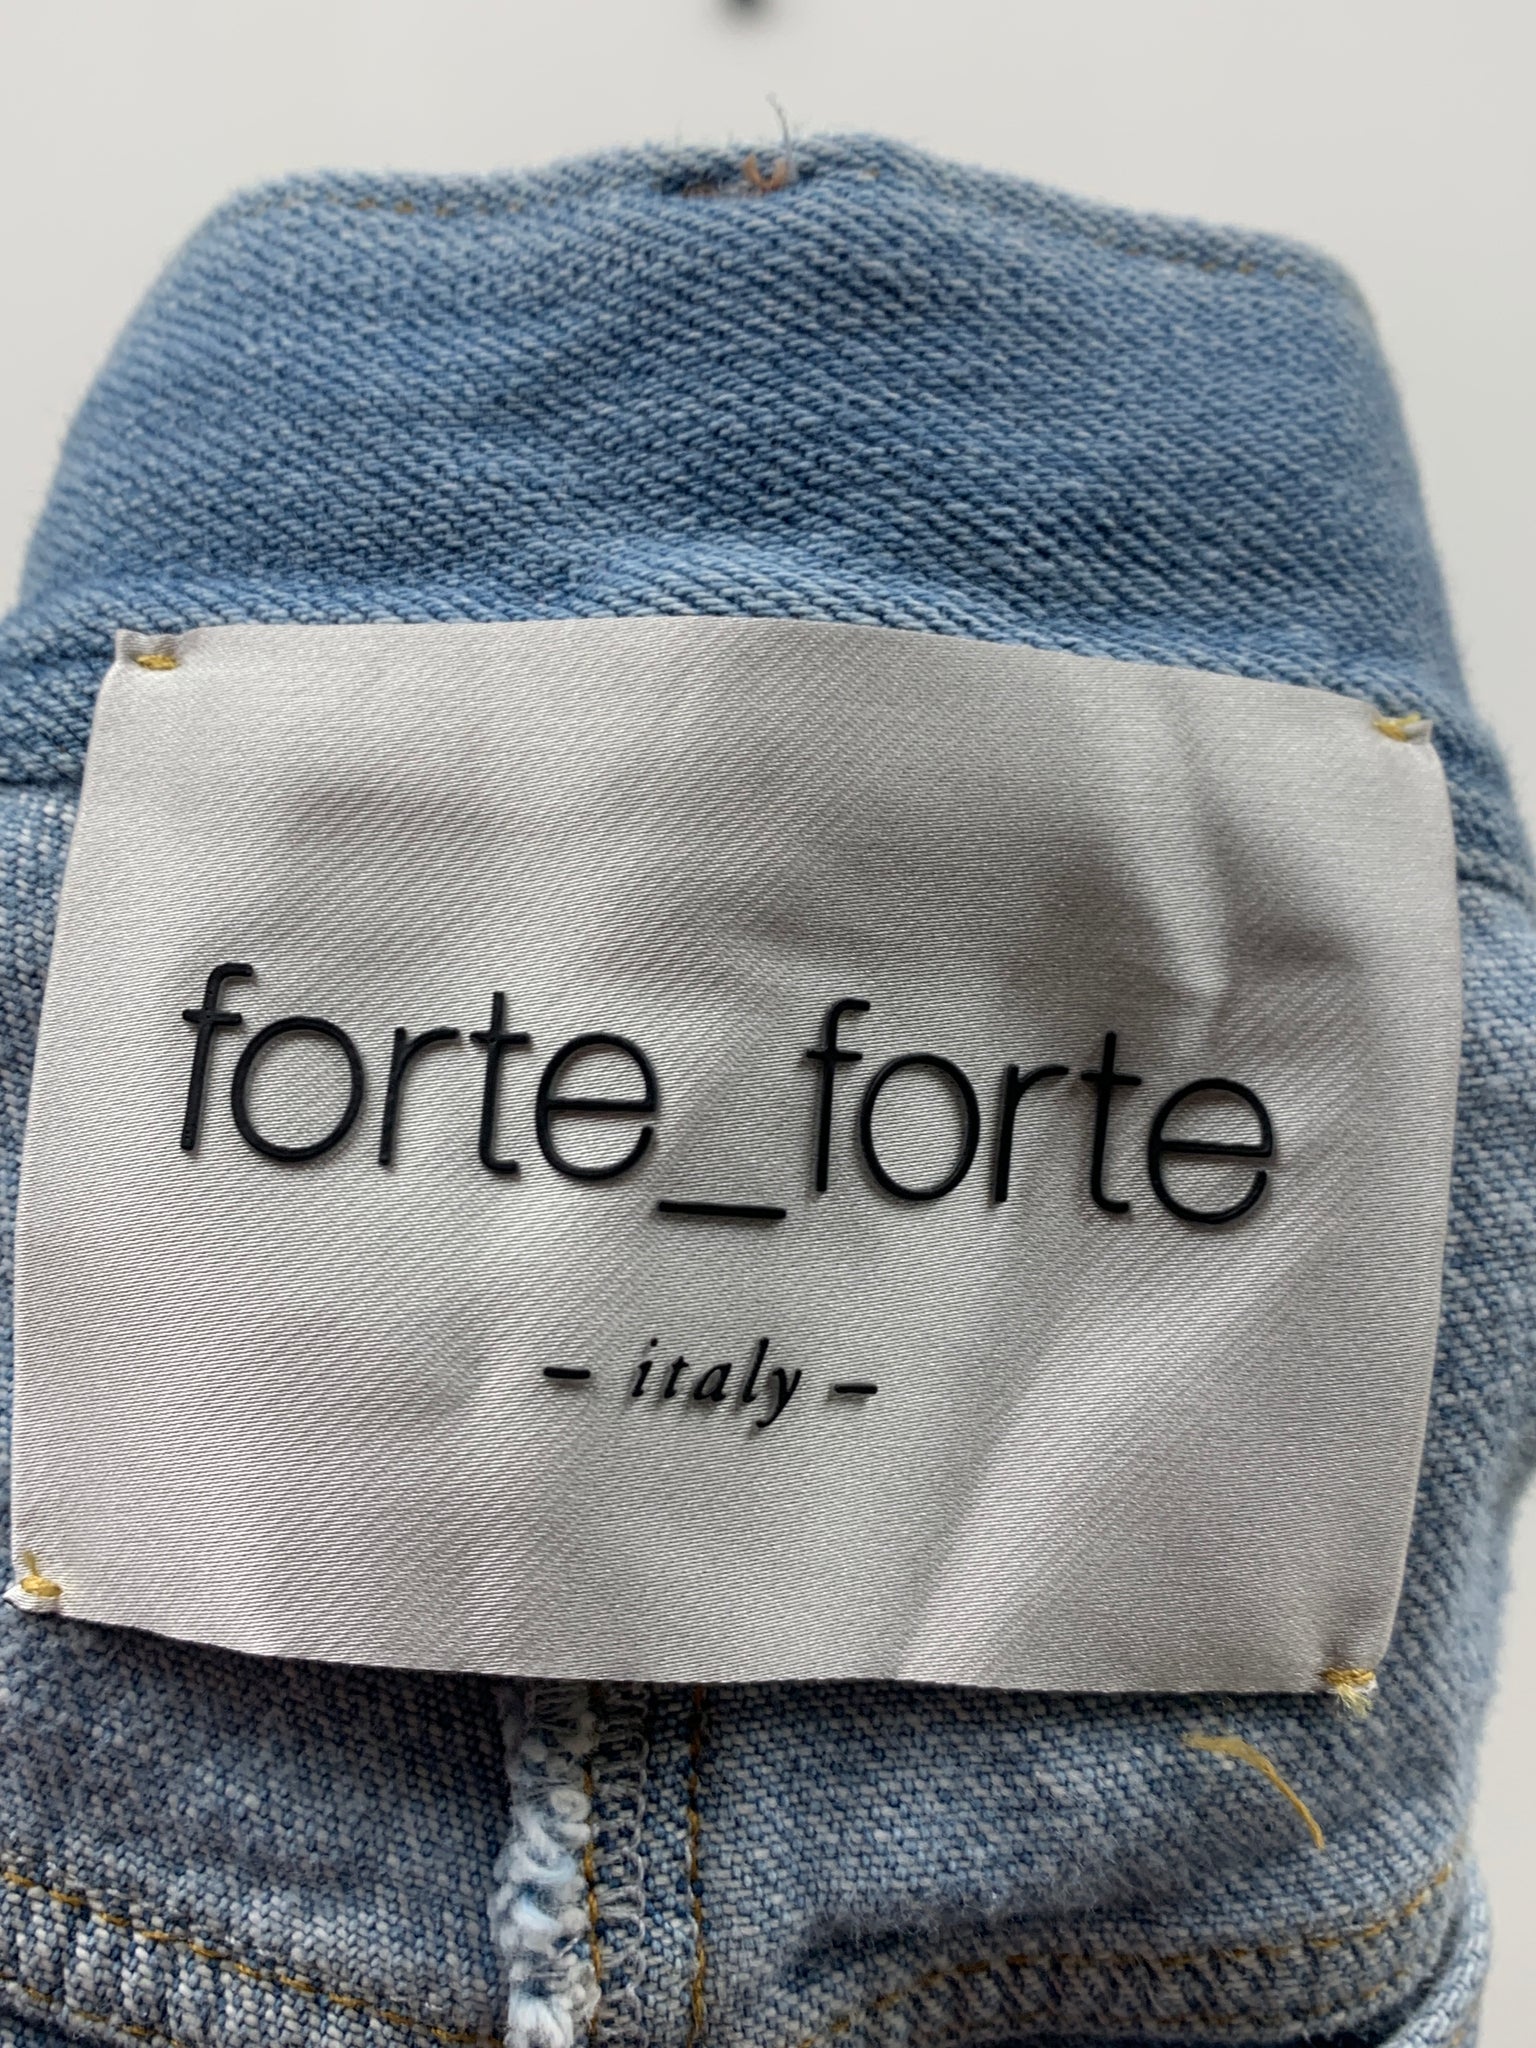 Forte forte jeans